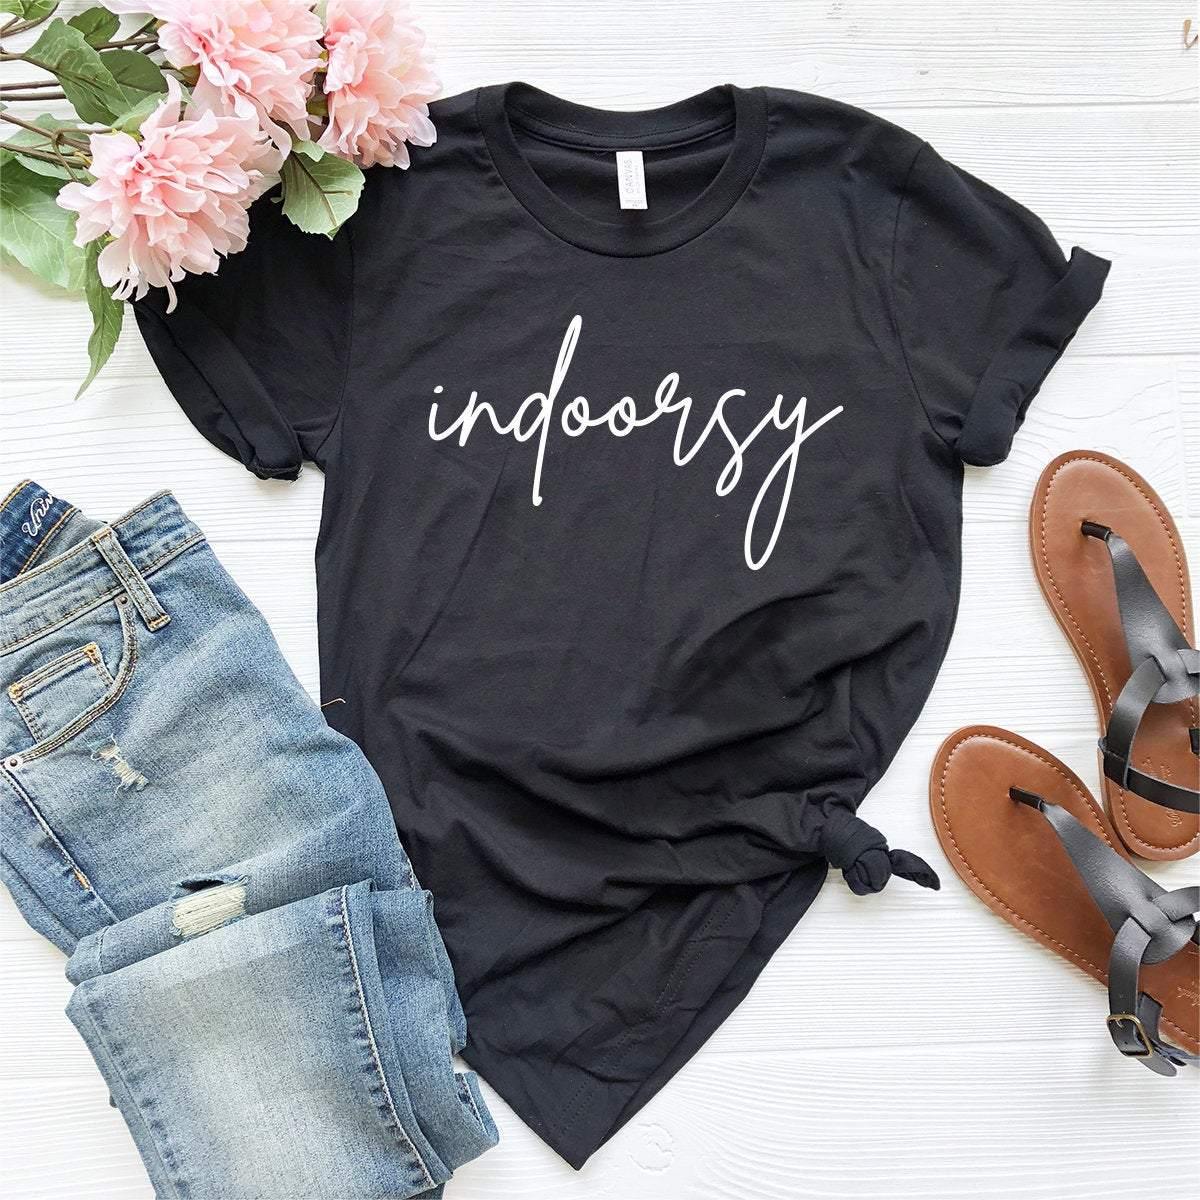 Indoorsy Shirt, Indoorsy T-Shirt, Funny Anti-Social Tee, Introvert Shirt, Anti-Social Shirt, Homebody Shirt, Staying In Tee, Introvert Tee - Fastdeliverytees.com